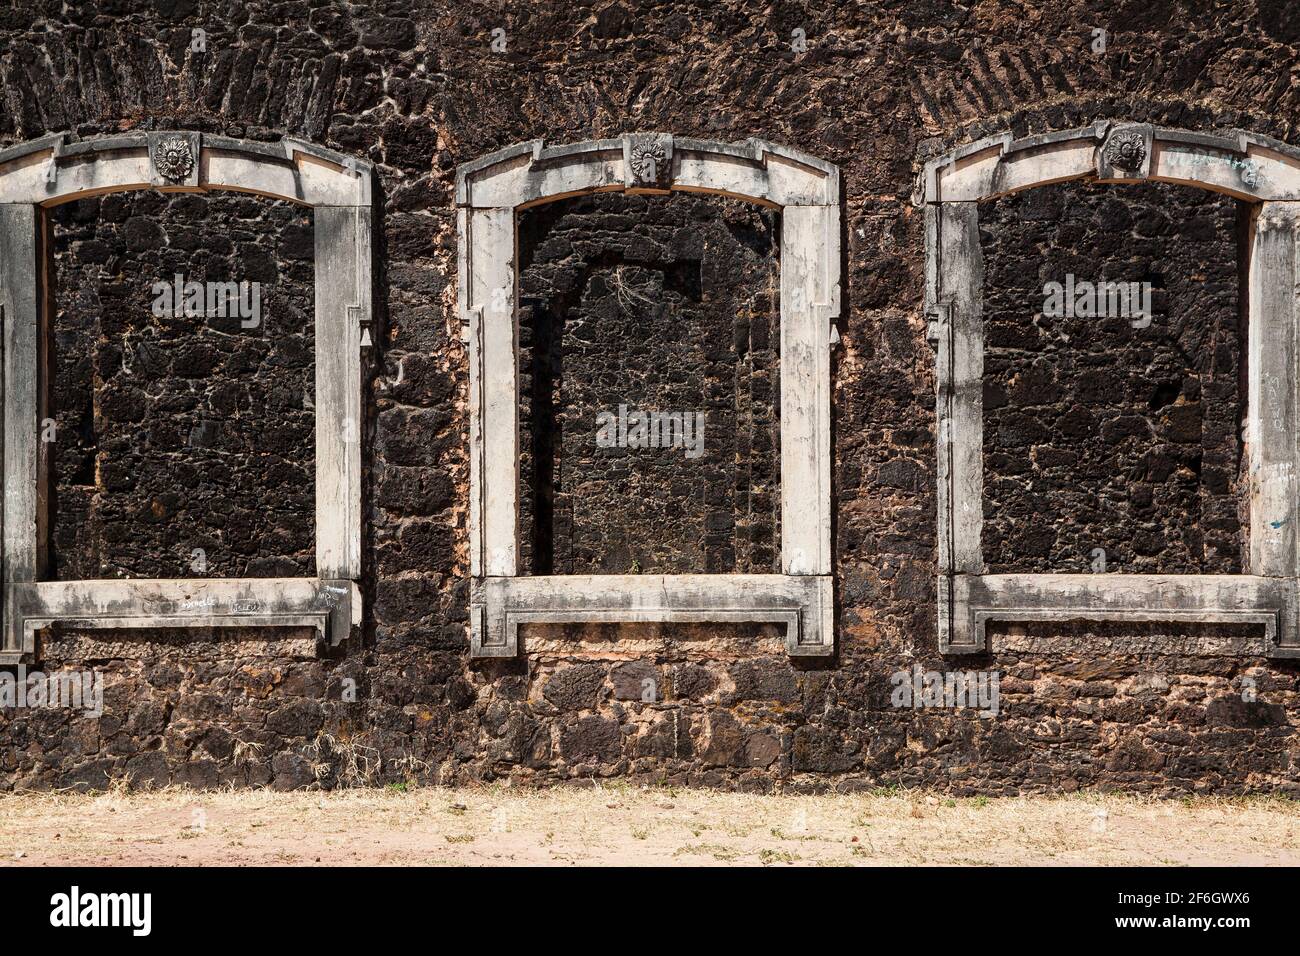 Blocked windows, ruins at Alcantara, Maranhao, Brazil - the city was declared by the Brazilian government as a National Historical Patrimony because of the ruins of the colonial and imperial period. Stock Photo